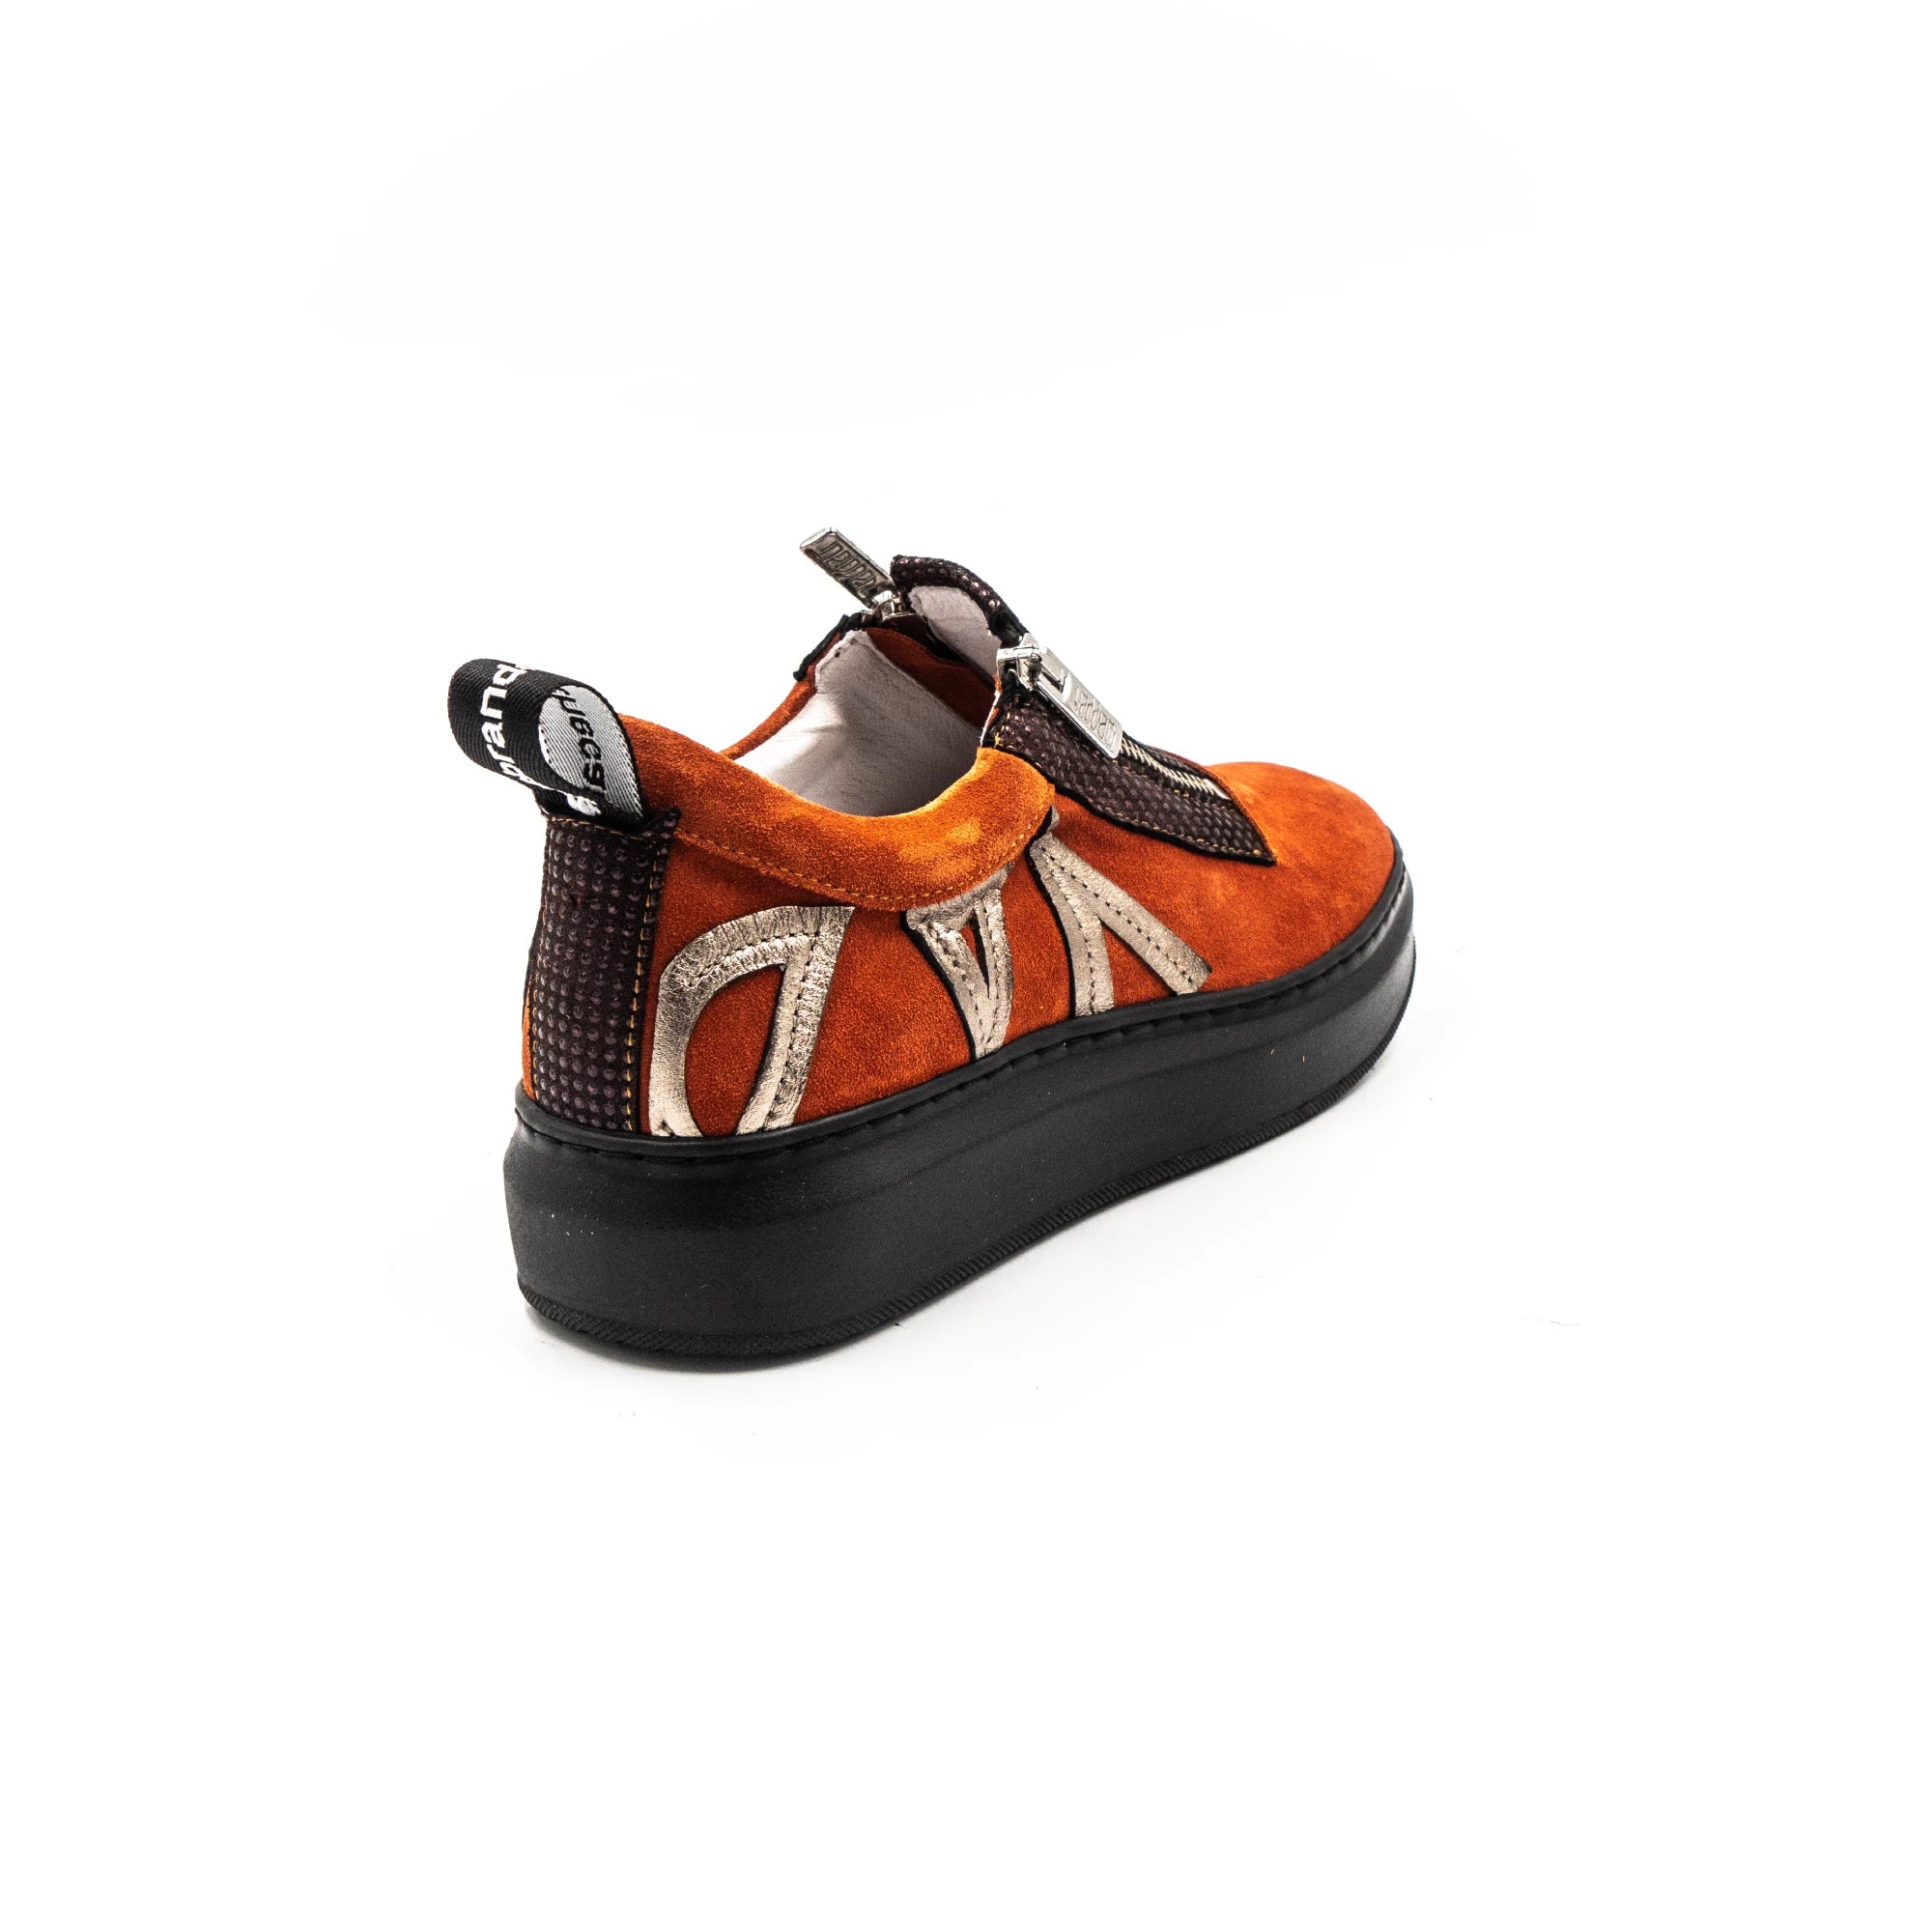 Zipped sneakers in orange with black rubber.